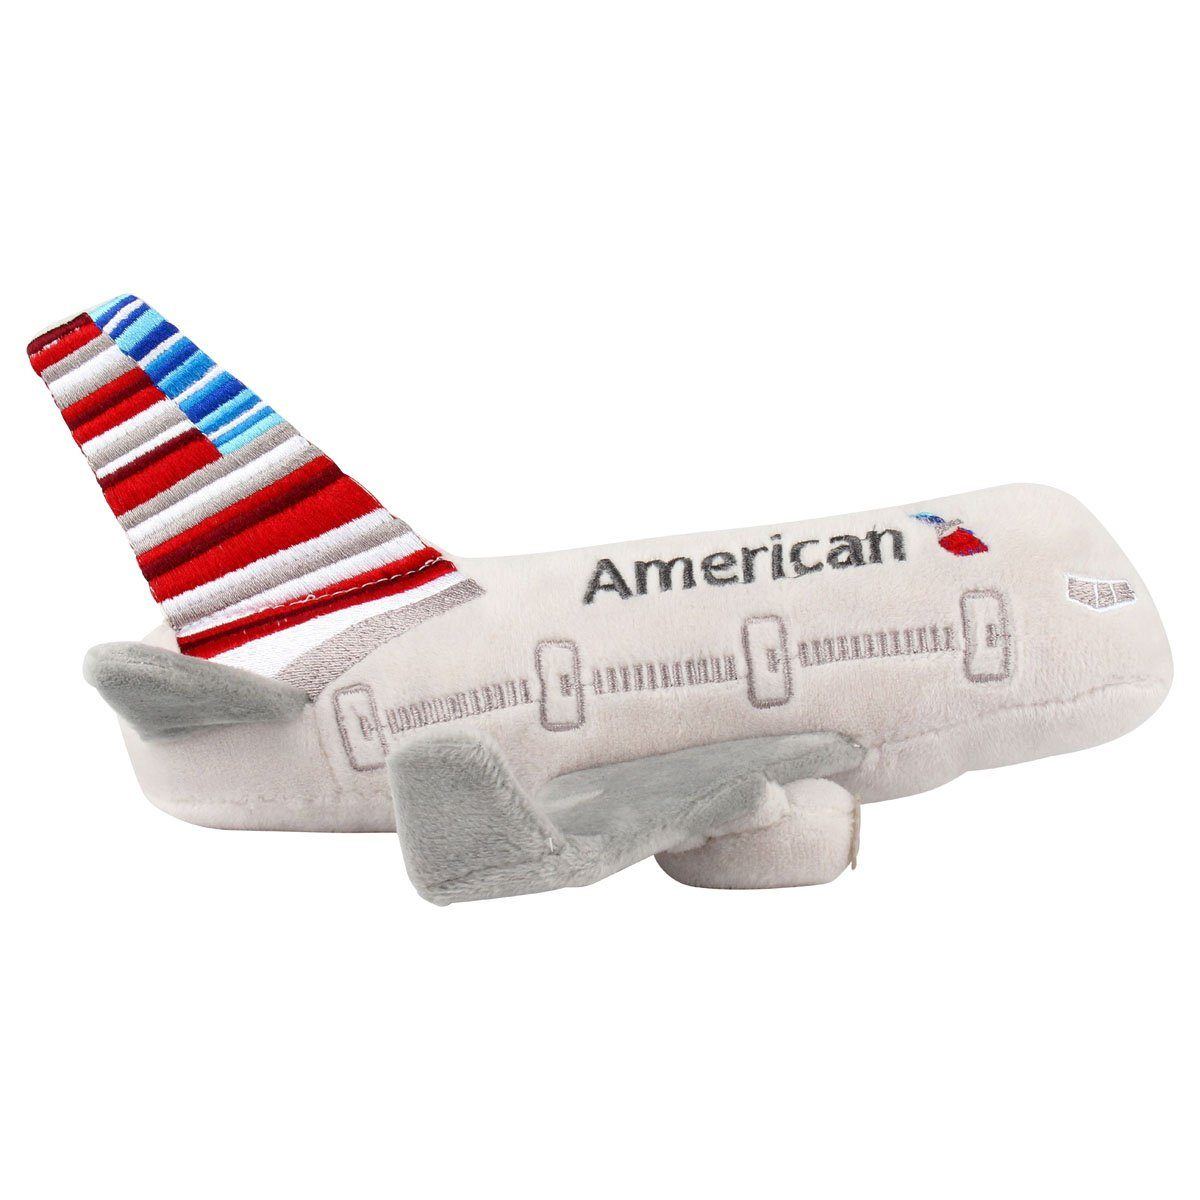 American Airlines Plush Airplane Toy